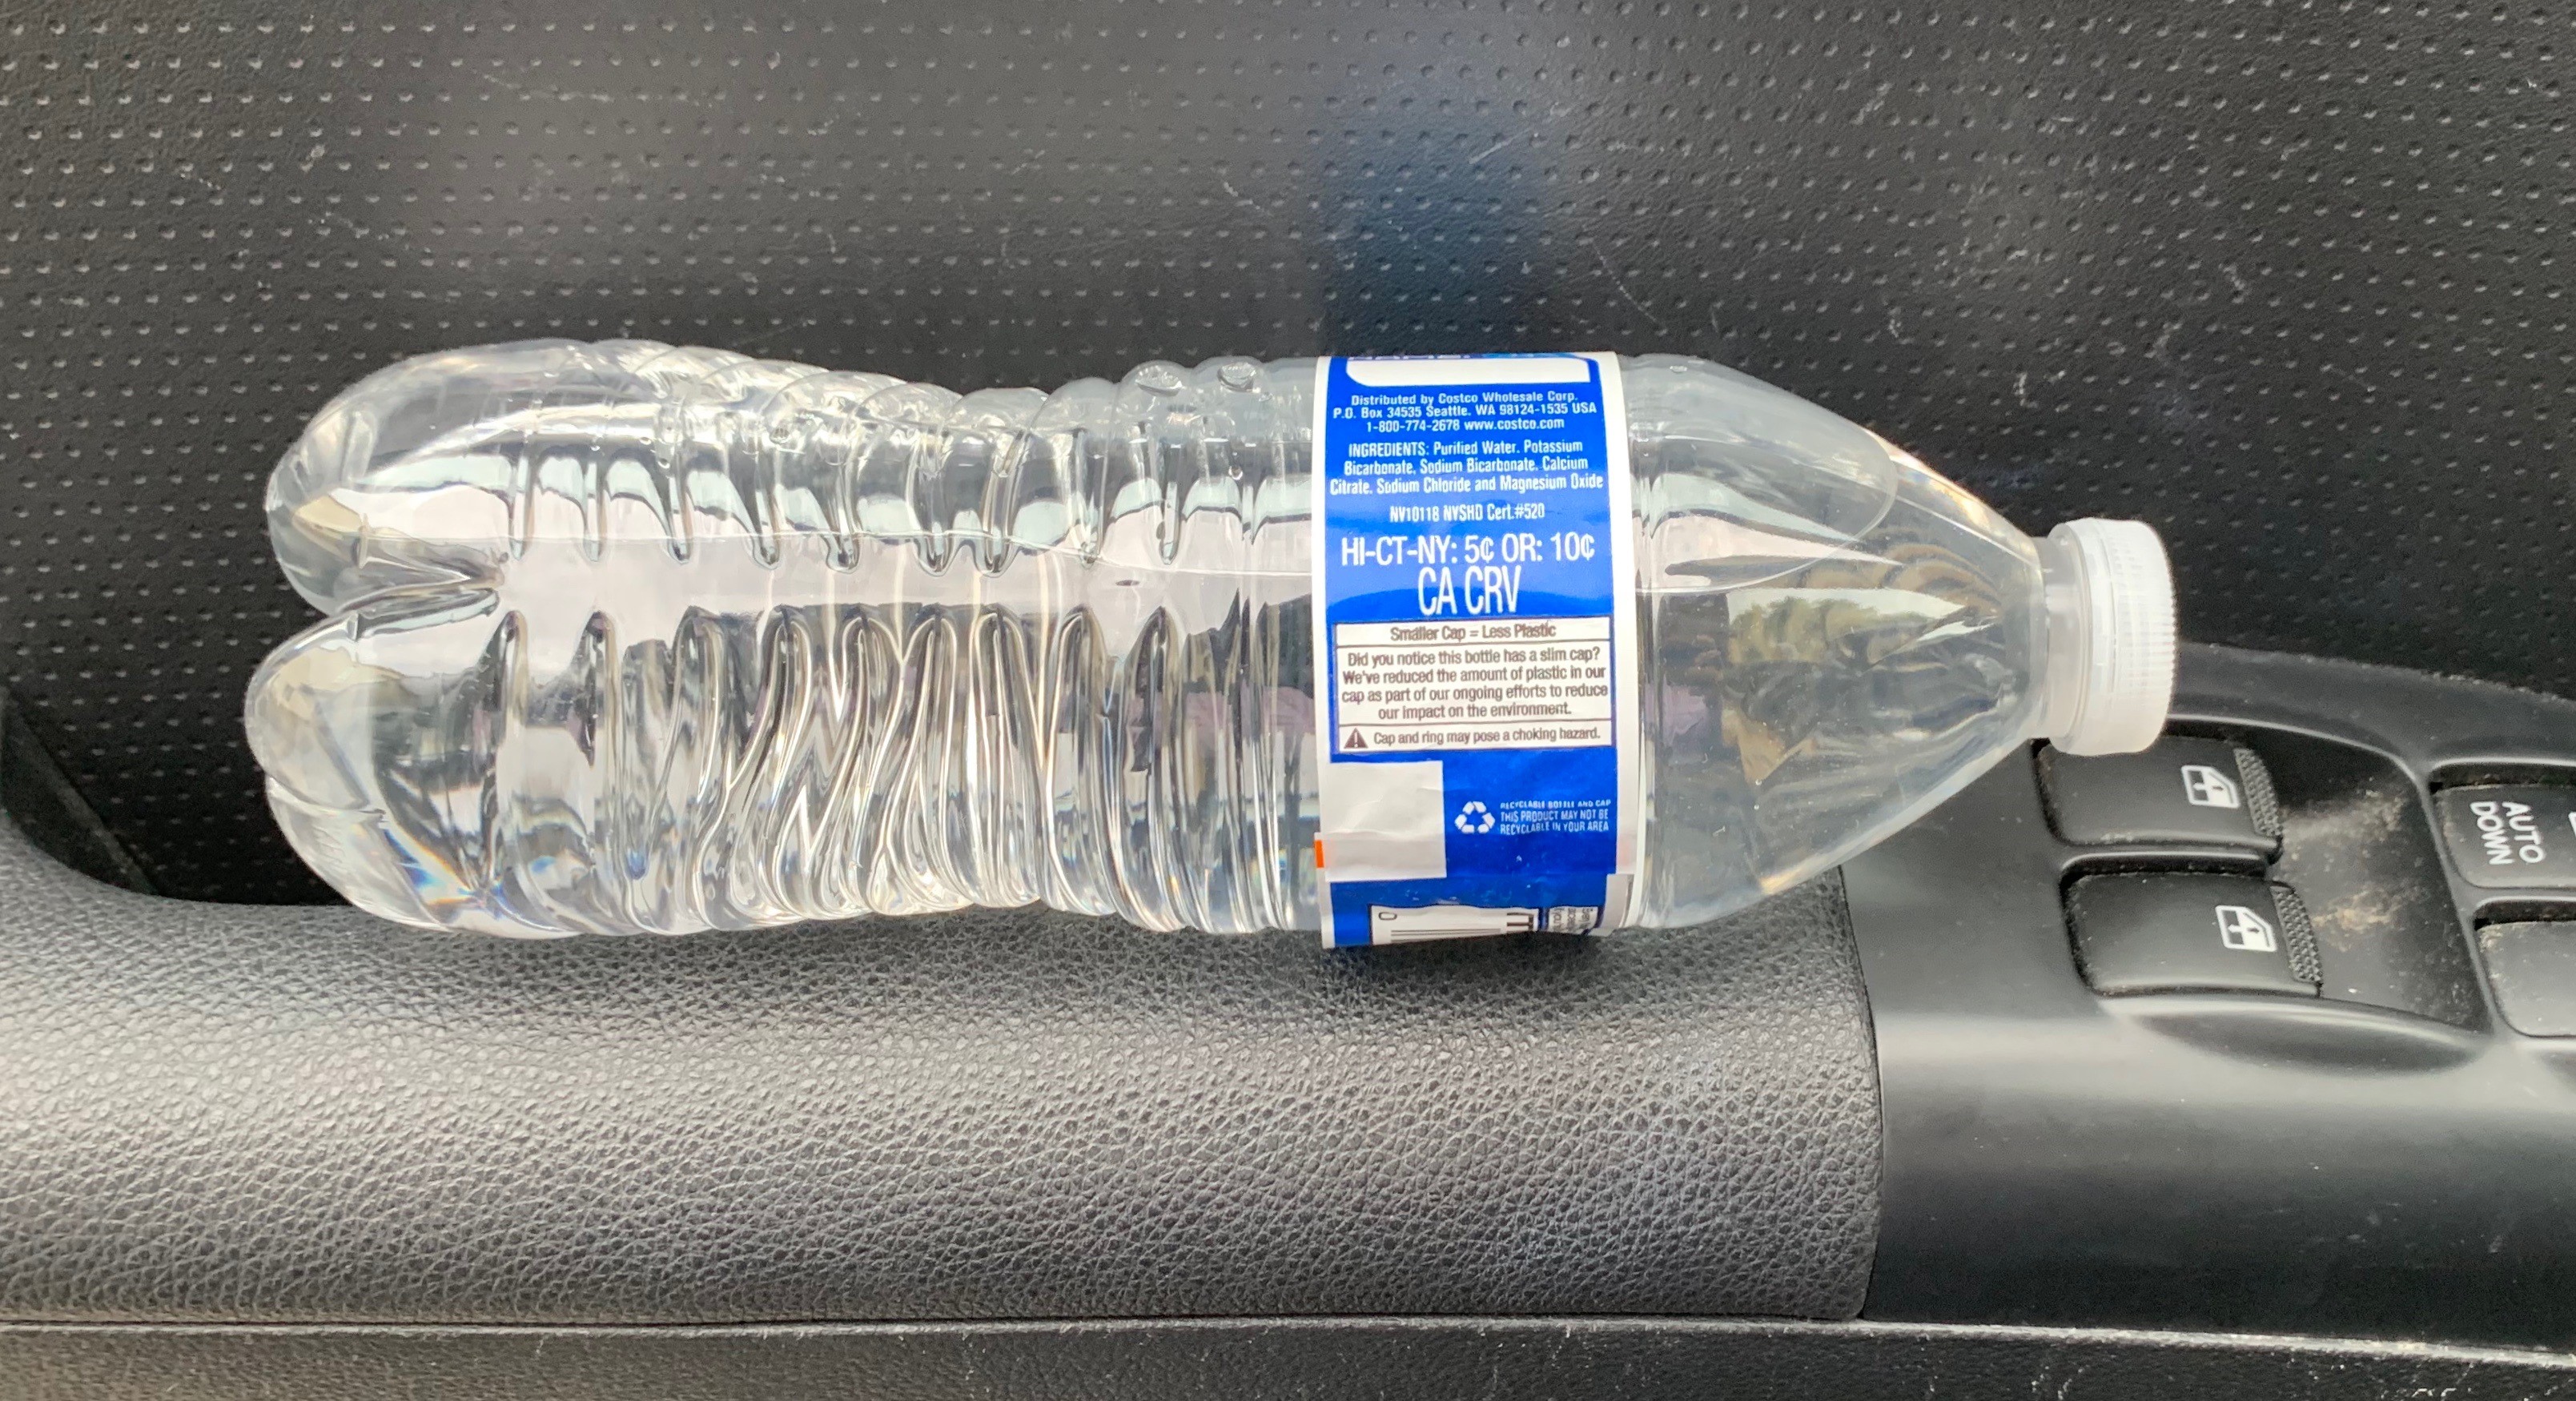 VERIFY: Is it safe to drink water from a plastic bottle left in a hot car?